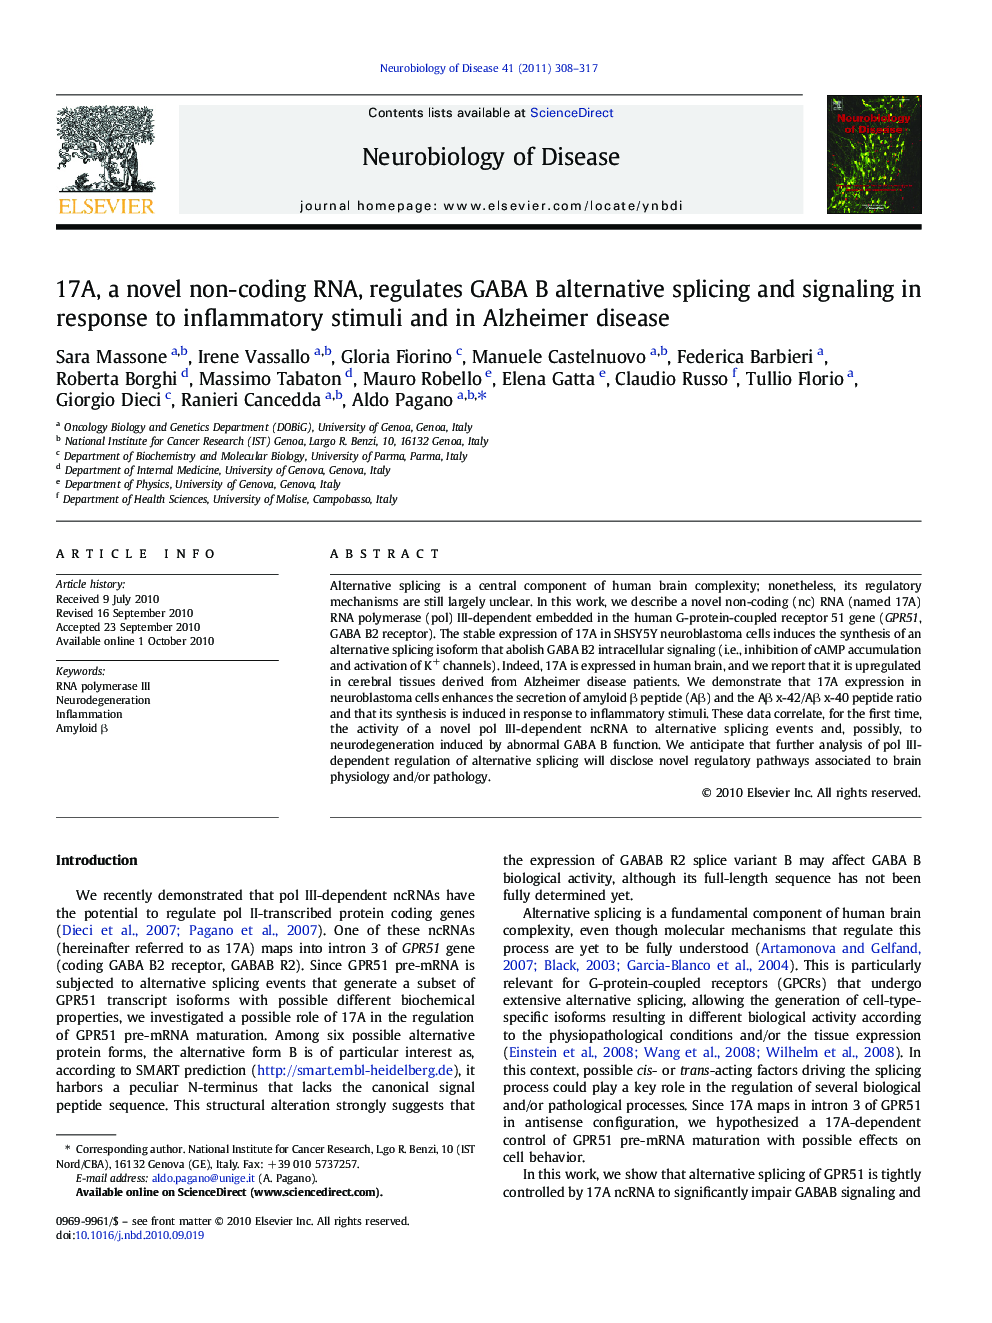 17A, a novel non-coding RNA, regulates GABA B alternative splicing and signaling in response to inflammatory stimuli and in Alzheimer disease